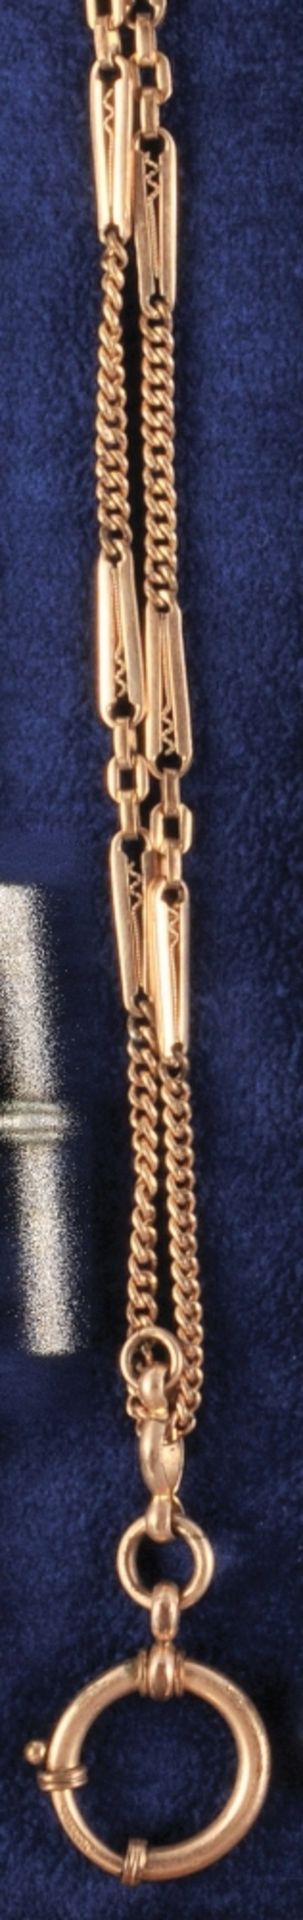 Thin, gold-plated pocket watch chain,